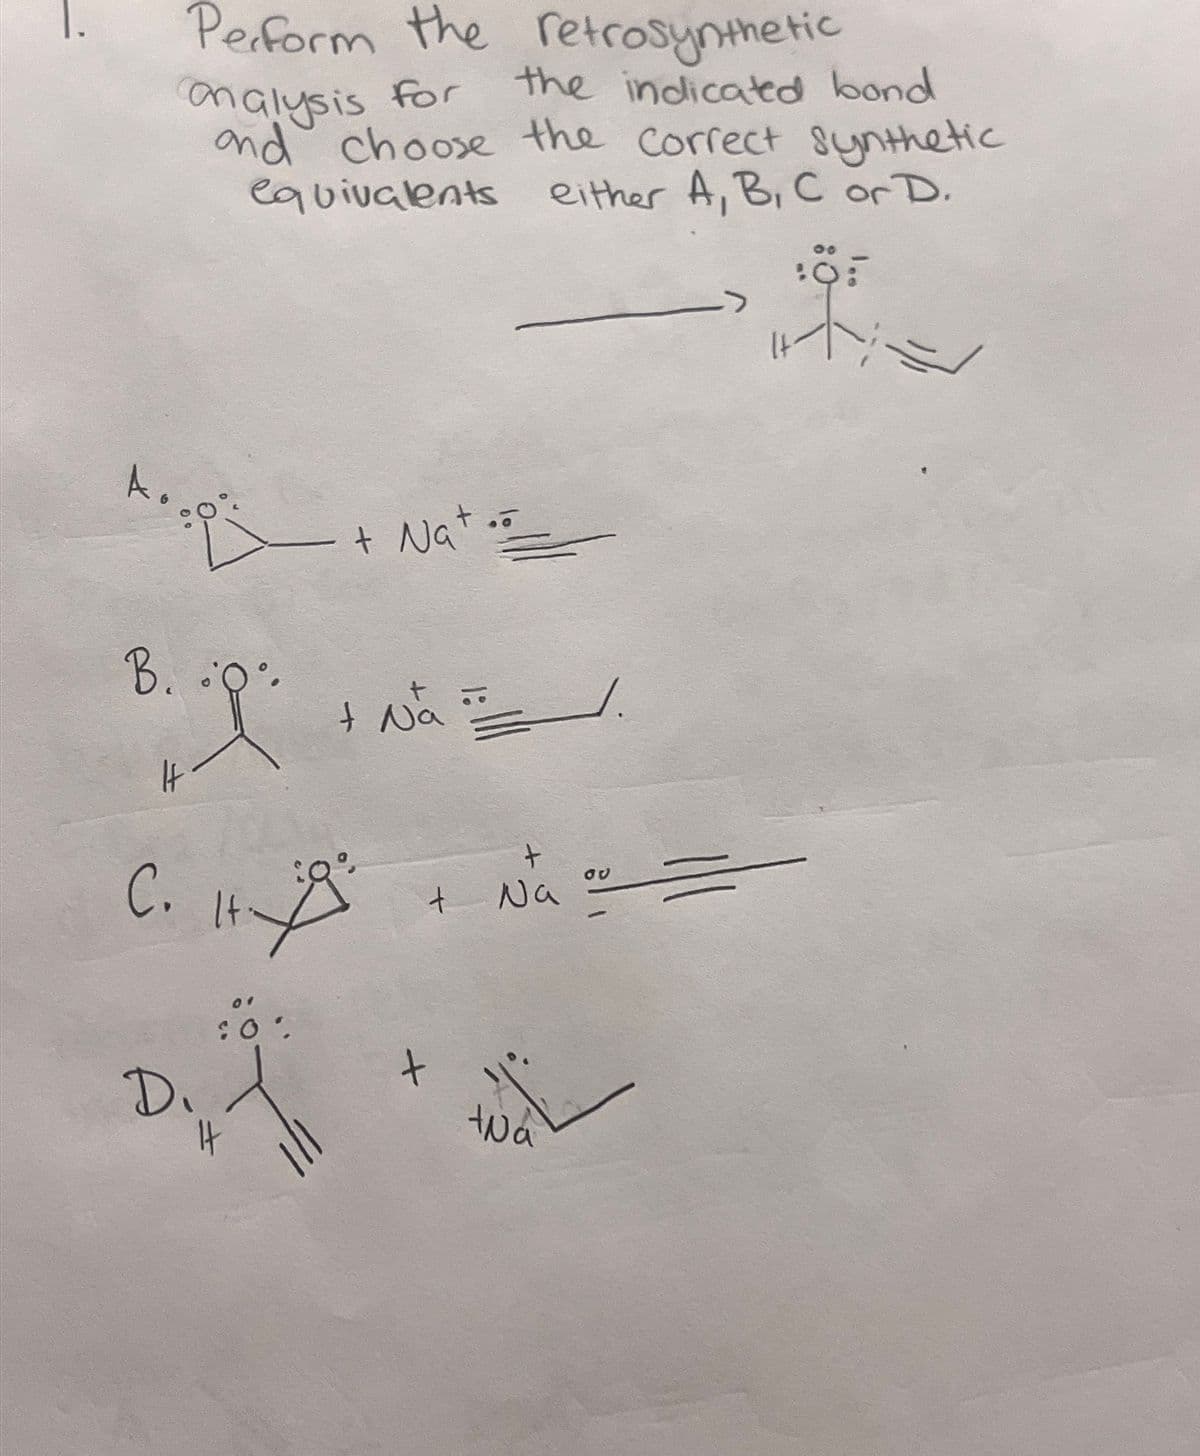 Perform the retrosynthetic
analysis
for
the indicated bond
and choose the correct synthetic
equivalents either A, B, C or D.
B.
+ Nat
+ Na
ου
C. H+ " + Na = =
D.
01
: 0°
+wa